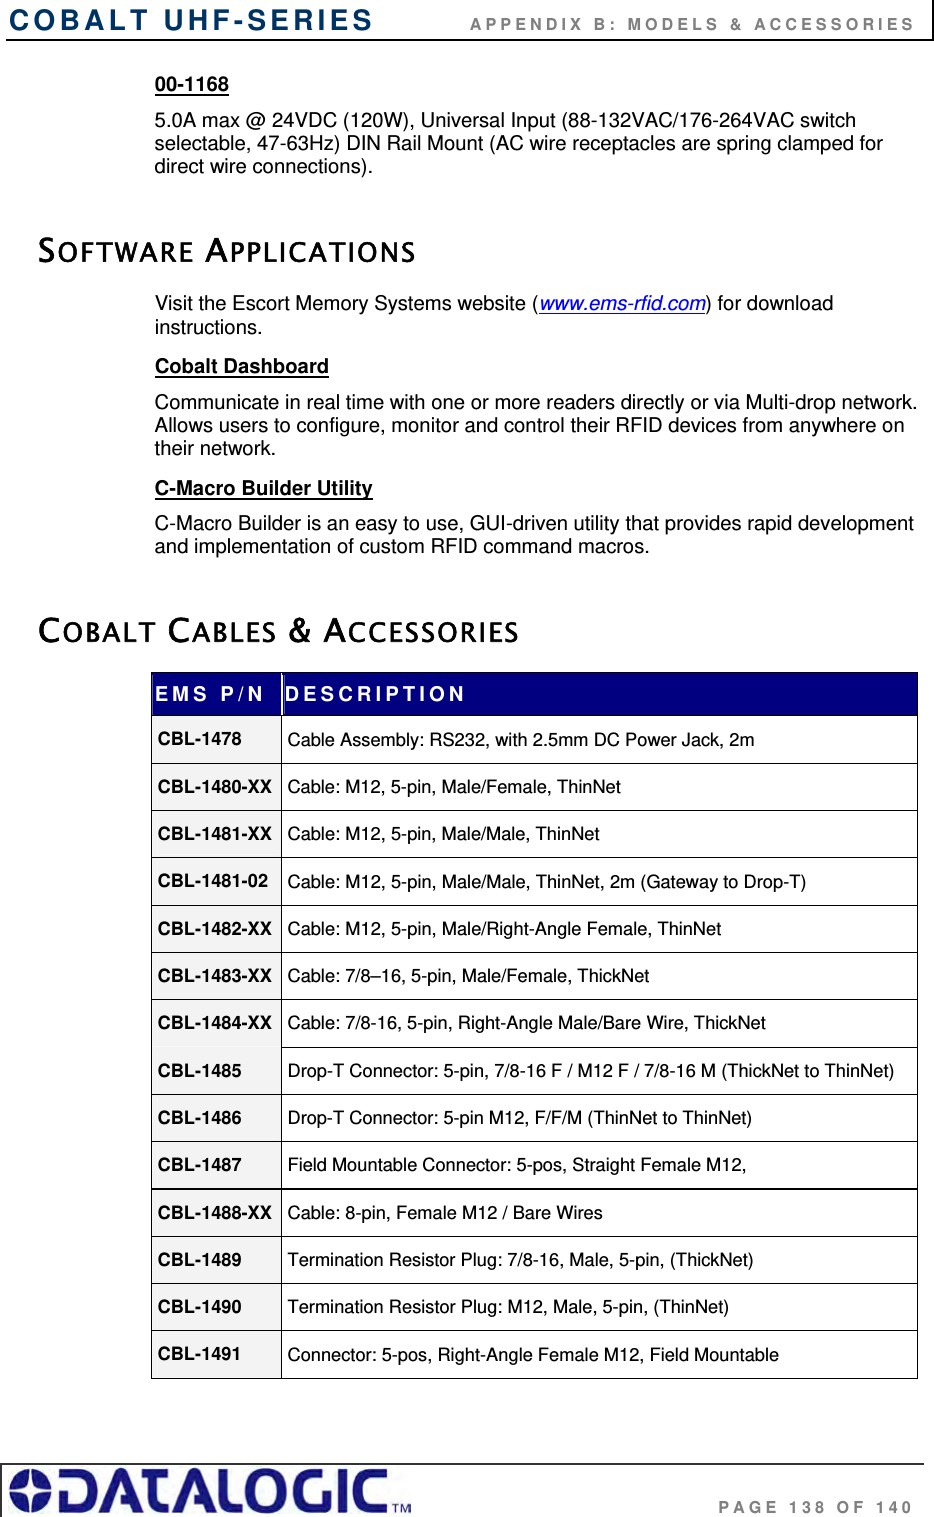 COBALT UHF-SERIES           APPENDIX B: MODELS &amp; ACCESSORIES                                     PAGE 138 OF 140 00-1168  5.0A max @ 24VDC (120W), Universal Input (88-132VAC/176-264VAC switch selectable, 47-63Hz) DIN Rail Mount (AC wire receptacles are spring clamped for direct wire connections).  SOFTWARE APPLICATIONS Visit the Escort Memory Systems website (www.ems-rfid.com) for download instructions. Cobalt Dashboard  Communicate in real time with one or more readers directly or via Multi-drop network. Allows users to configure, monitor and control their RFID devices from anywhere on their network.  C-Macro Builder Utility C-Macro Builder is an easy to use, GUI-driven utility that provides rapid development and implementation of custom RFID command macros.  COBALT CABLES &amp; ACCESSORIES EMS P/N  DESCRIPTION CBL-1478  Cable Assembly: RS232, with 2.5mm DC Power Jack, 2m CBL-1480-XX  Cable: M12, 5-pin, Male/Female, ThinNet CBL-1481-XX  Cable: M12, 5-pin, Male/Male, ThinNet CBL-1481-02  Cable: M12, 5-pin, Male/Male, ThinNet, 2m (Gateway to Drop-T) CBL-1482-XX  Cable: M12, 5-pin, Male/Right-Angle Female, ThinNet CBL-1483-XX  Cable: 7/8–16, 5-pin, Male/Female, ThickNet CBL-1484-XX  Cable: 7/8-16, 5-pin, Right-Angle Male/Bare Wire, ThickNet CBL-1485  Drop-T Connector: 5-pin, 7/8-16 F / M12 F / 7/8-16 M (ThickNet to ThinNet) CBL-1486  Drop-T Connector: 5-pin M12, F/F/M (ThinNet to ThinNet) CBL-1487  Field Mountable Connector: 5-pos, Straight Female M12,  CBL-1488-XX  Cable: 8-pin, Female M12 / Bare Wires CBL-1489  Termination Resistor Plug: 7/8-16, Male, 5-pin, (ThickNet) CBL-1490  Termination Resistor Plug: M12, Male, 5-pin, (ThinNet) CBL-1491  Connector: 5-pos, Right-Angle Female M12, Field Mountable 